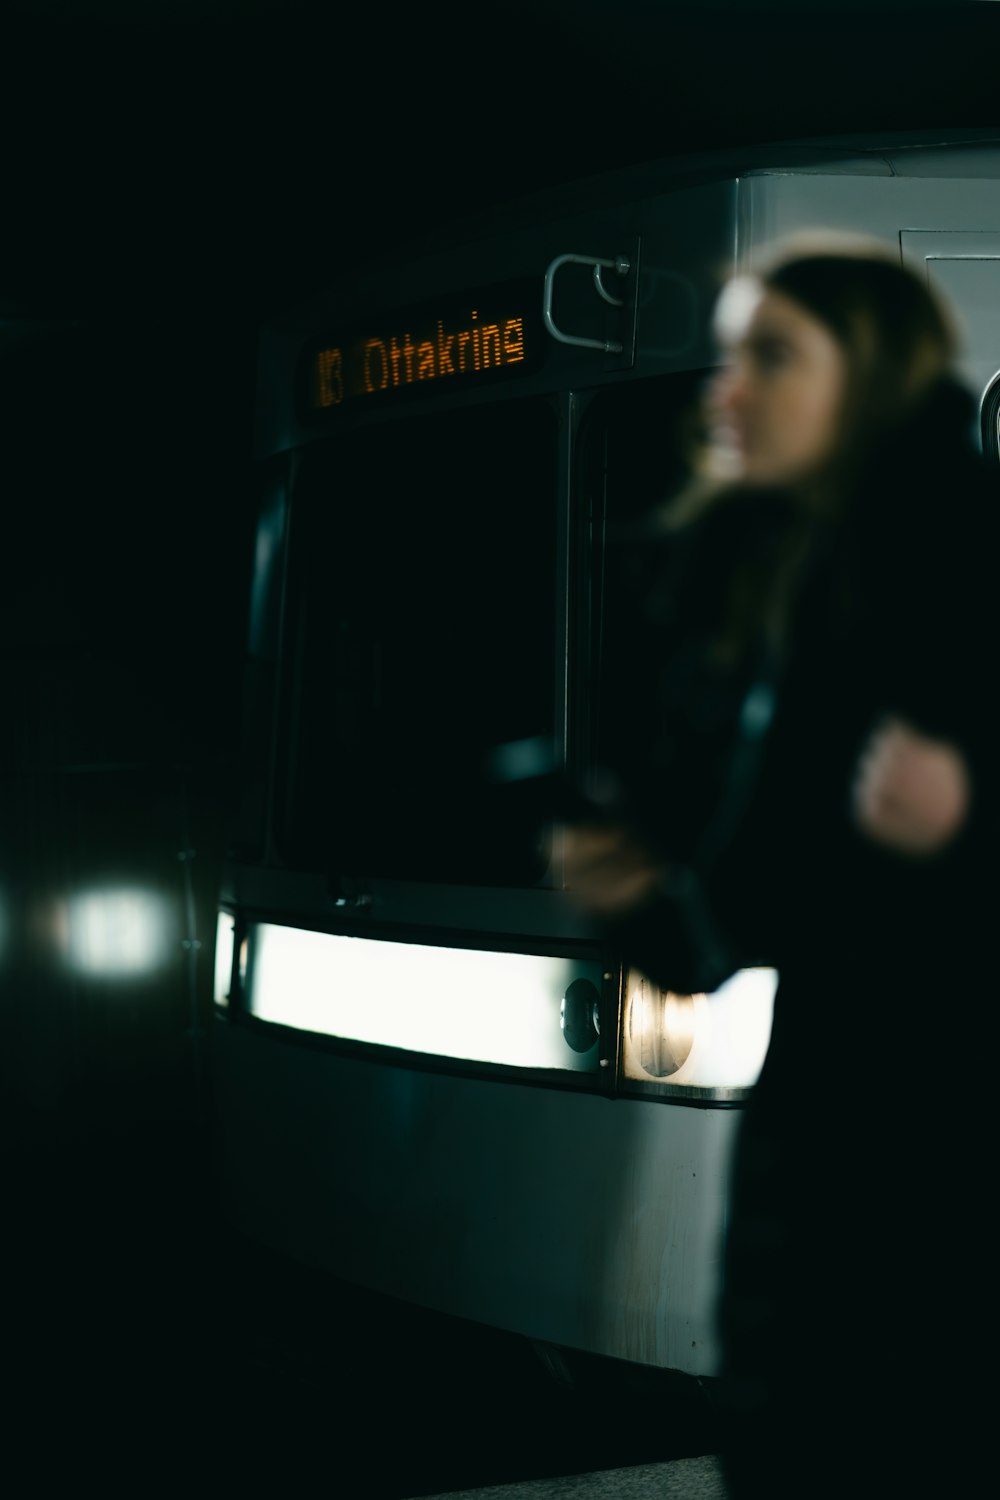 a woman standing in front of a bus at night